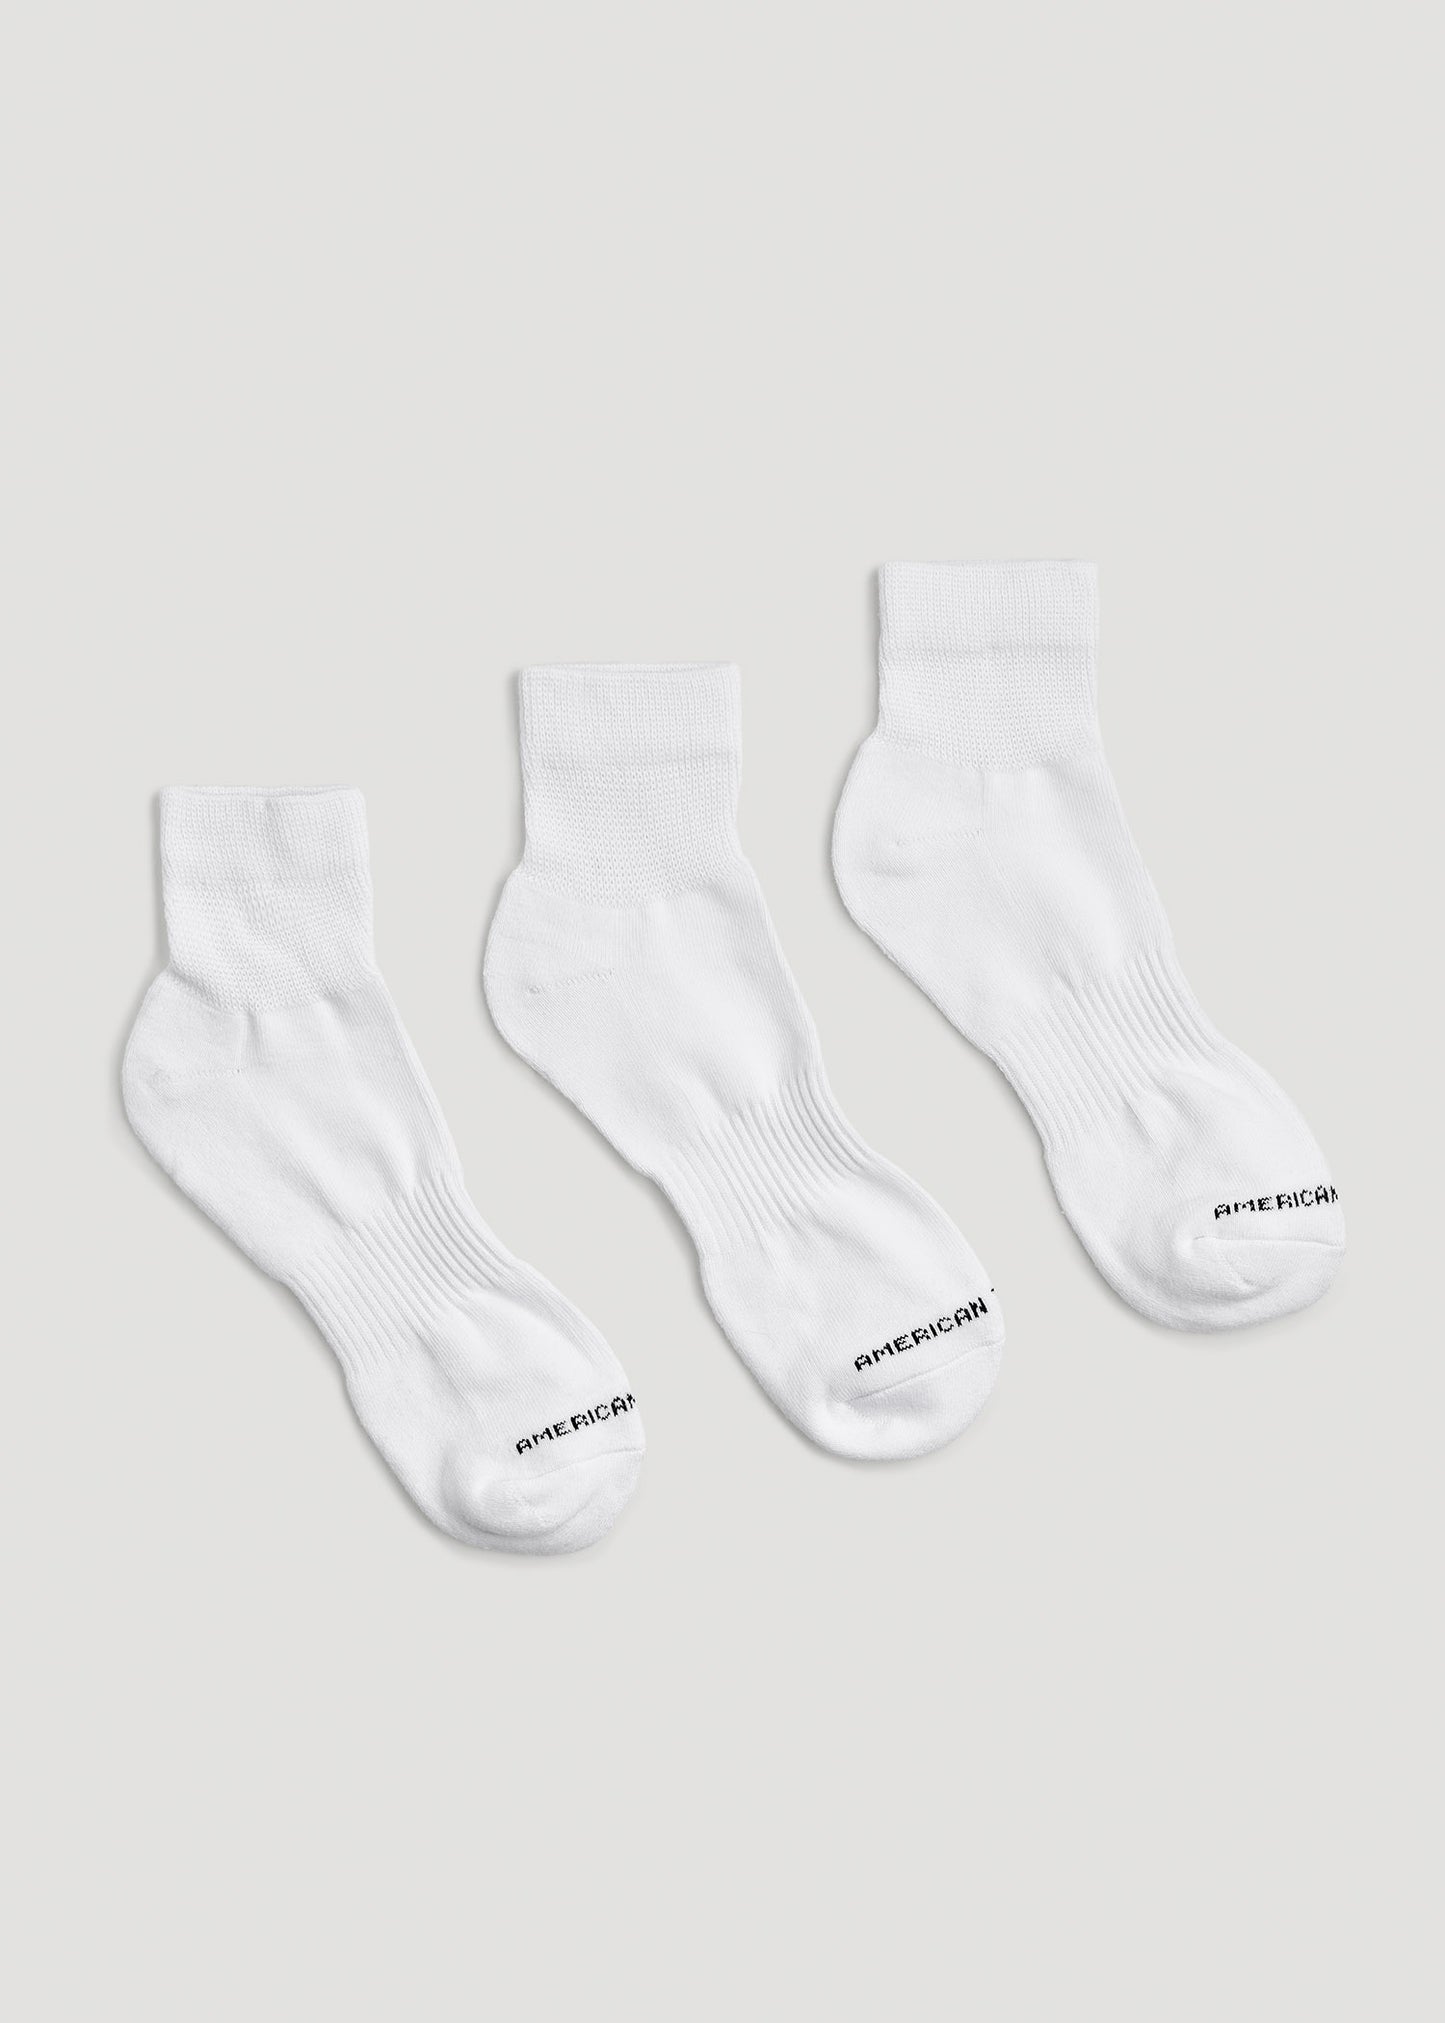       American-Tall-Mens-Athletic-Mid-Ankle-Socks-X-Large-Size-14-17-White-3-Pack-Detail2